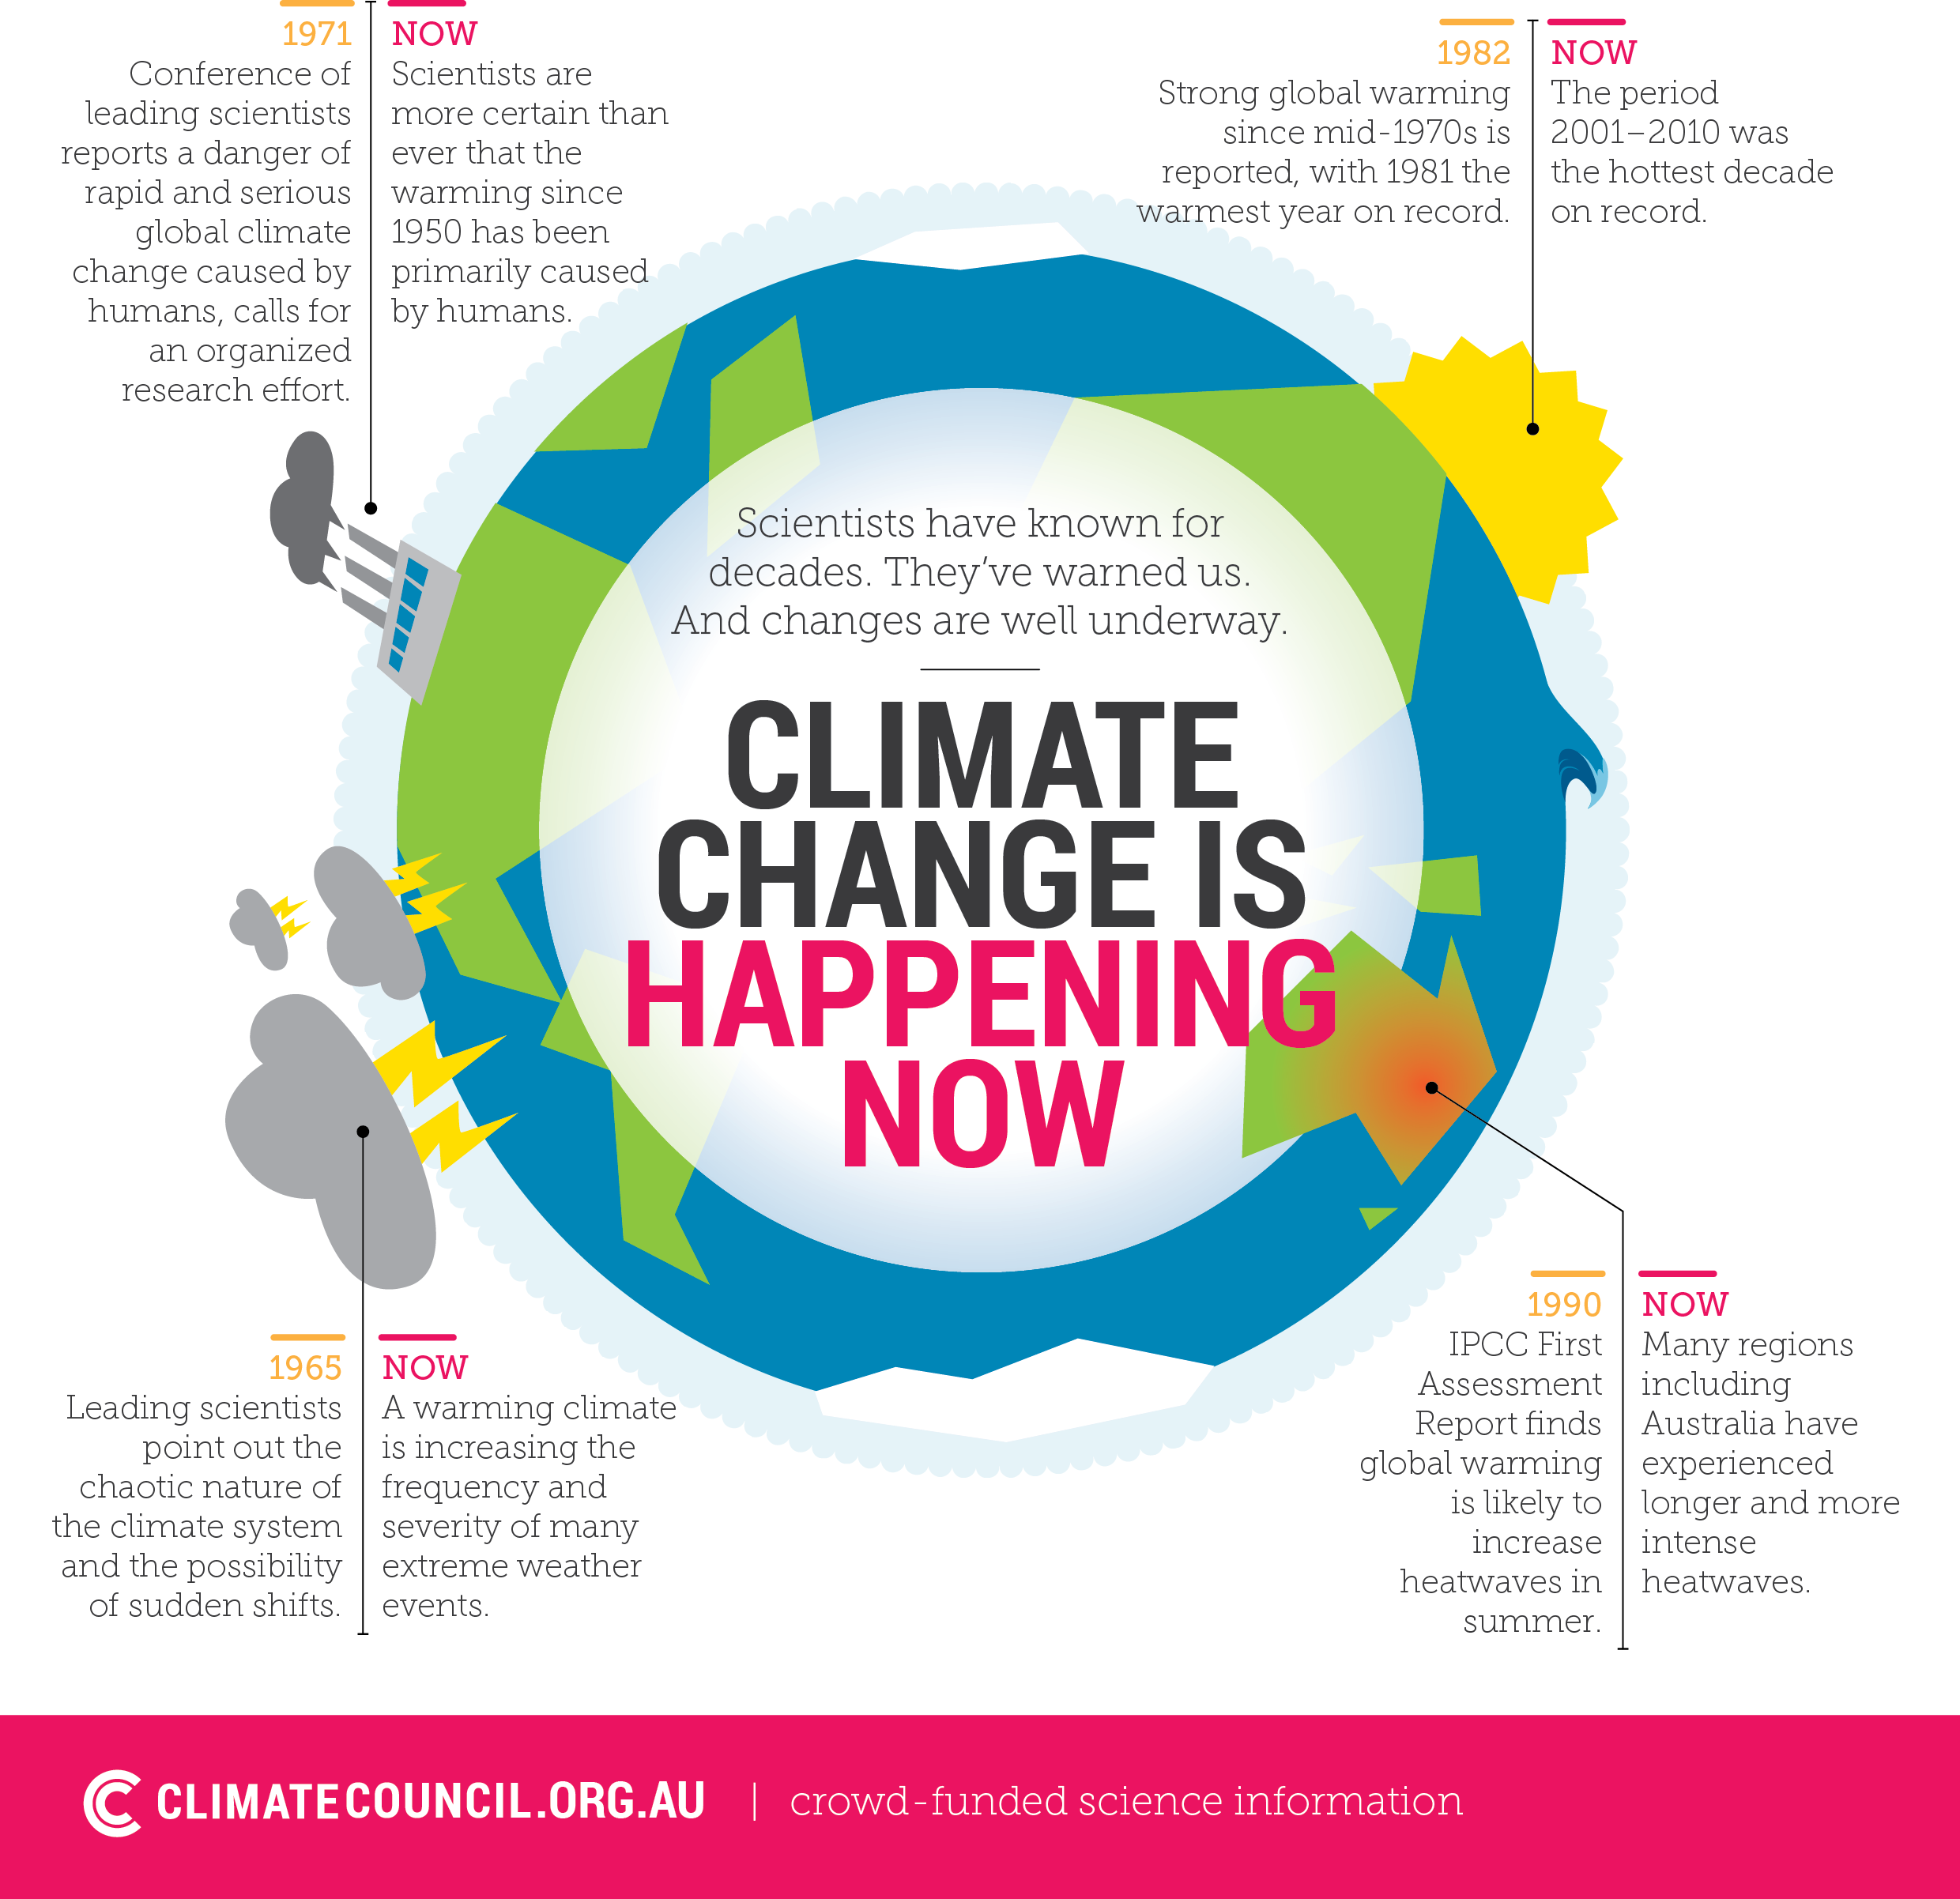 4th climate change report findings